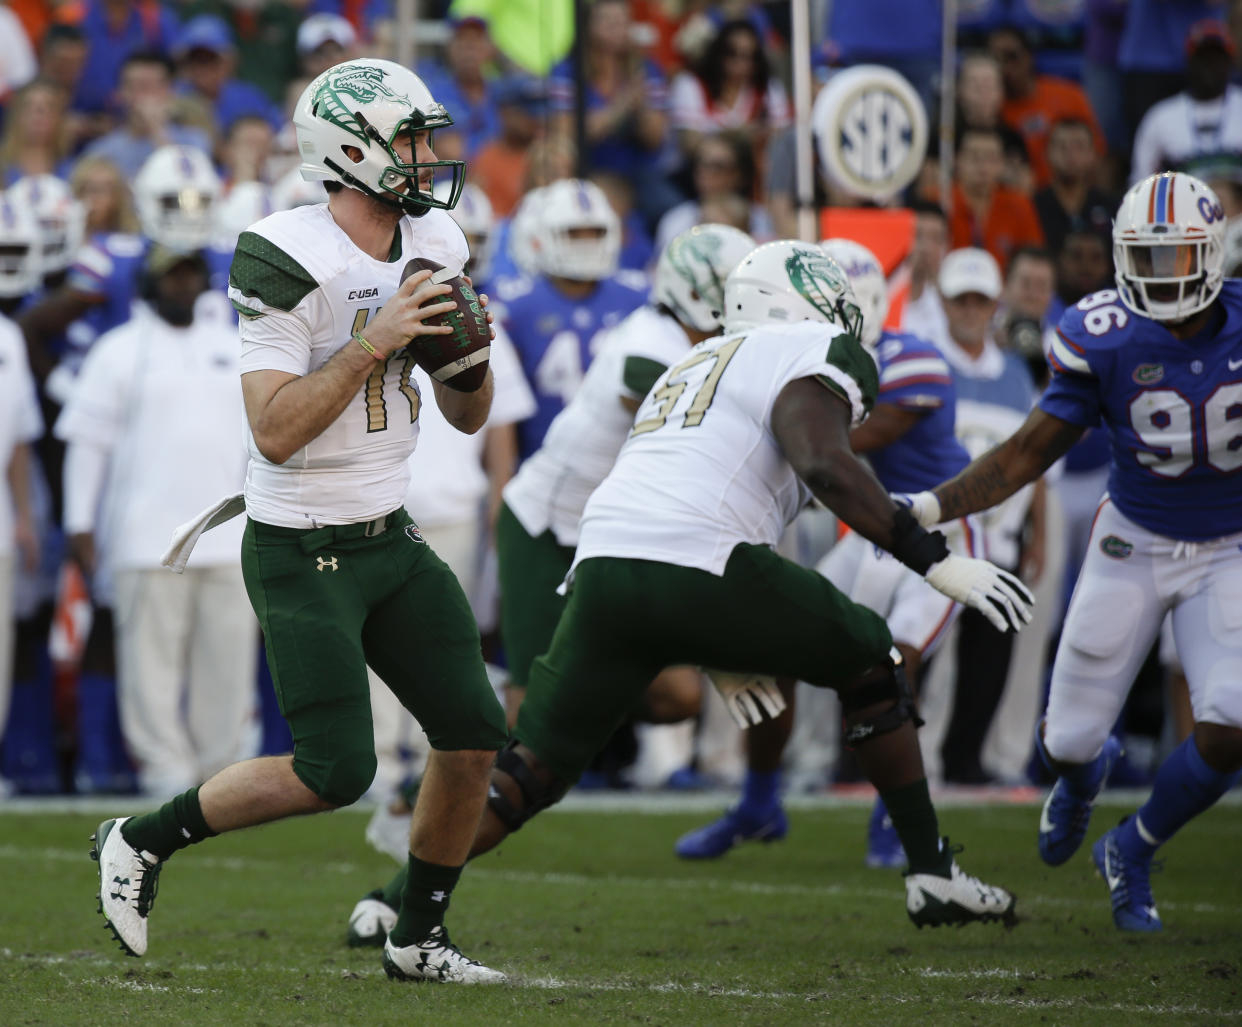 UAB quarterback A.J. Erdely (11) looks for a receiver as he is rushed by Florida defensive lineman Cece Jefferson (96) during the first half of an NCAA college football game, Saturday, Nov. 18, 2017, in Gainesville, Fla. (AP Photo/John Raoux)